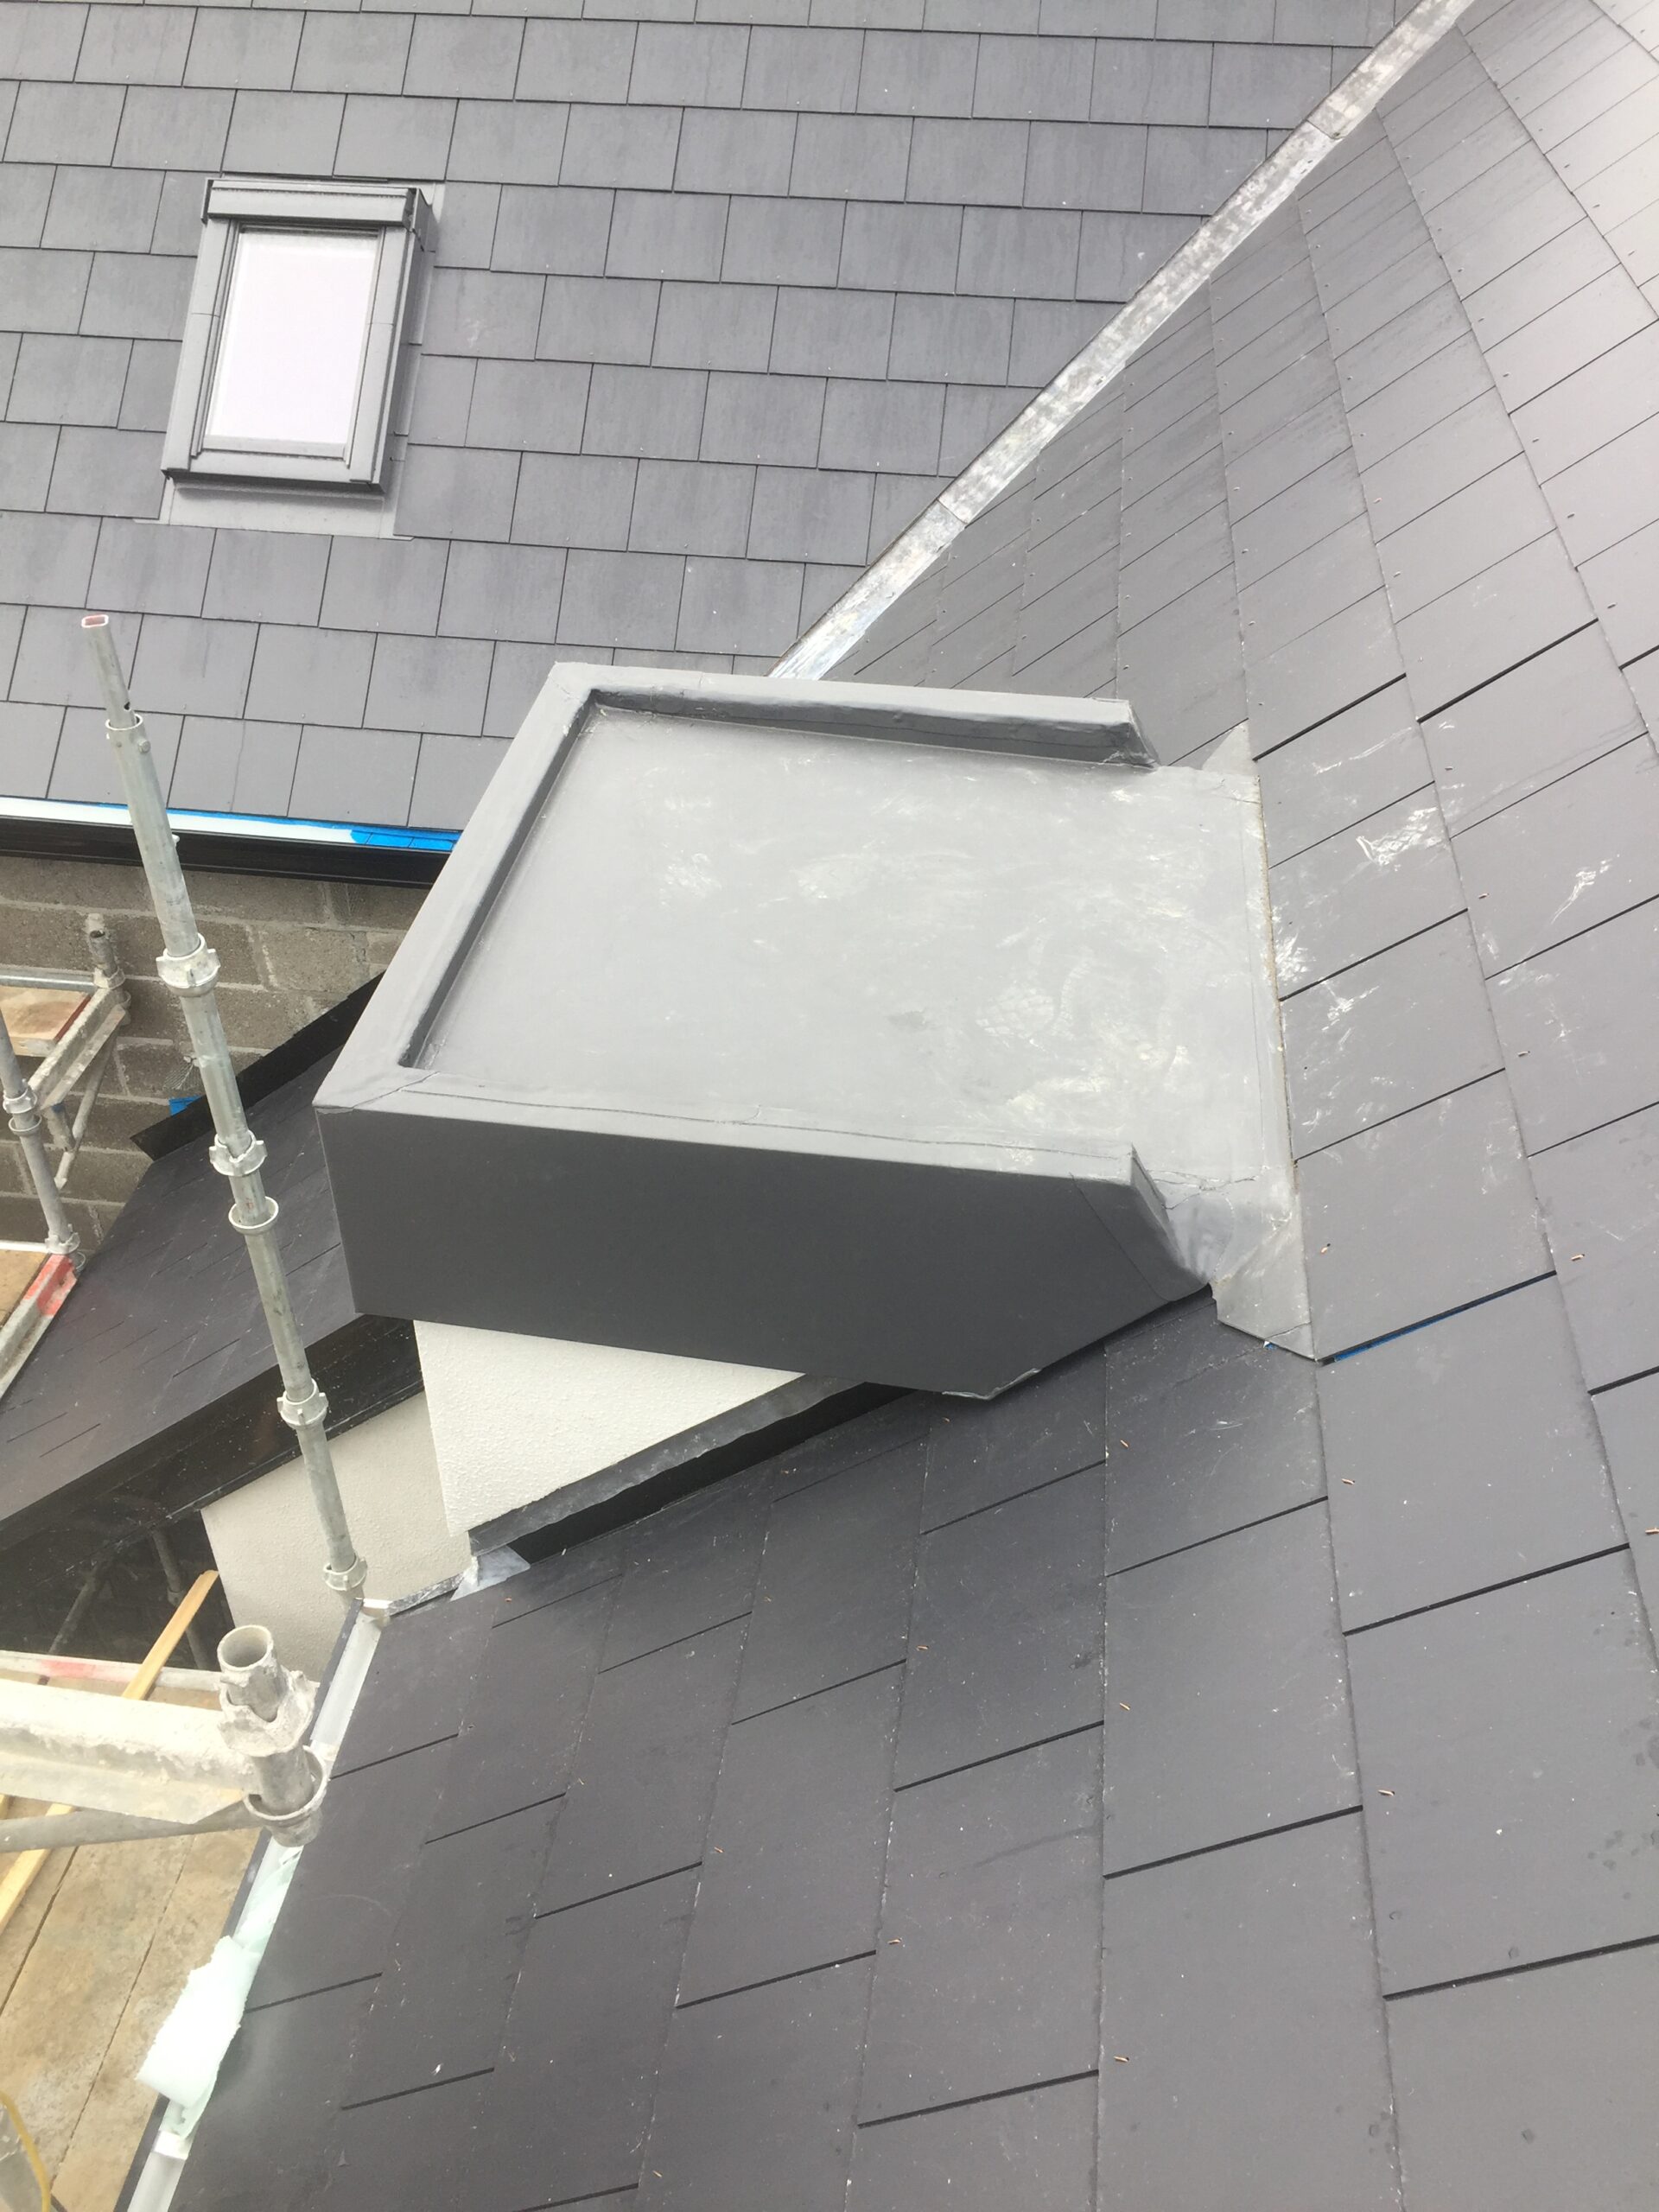 Additional window installed into roof